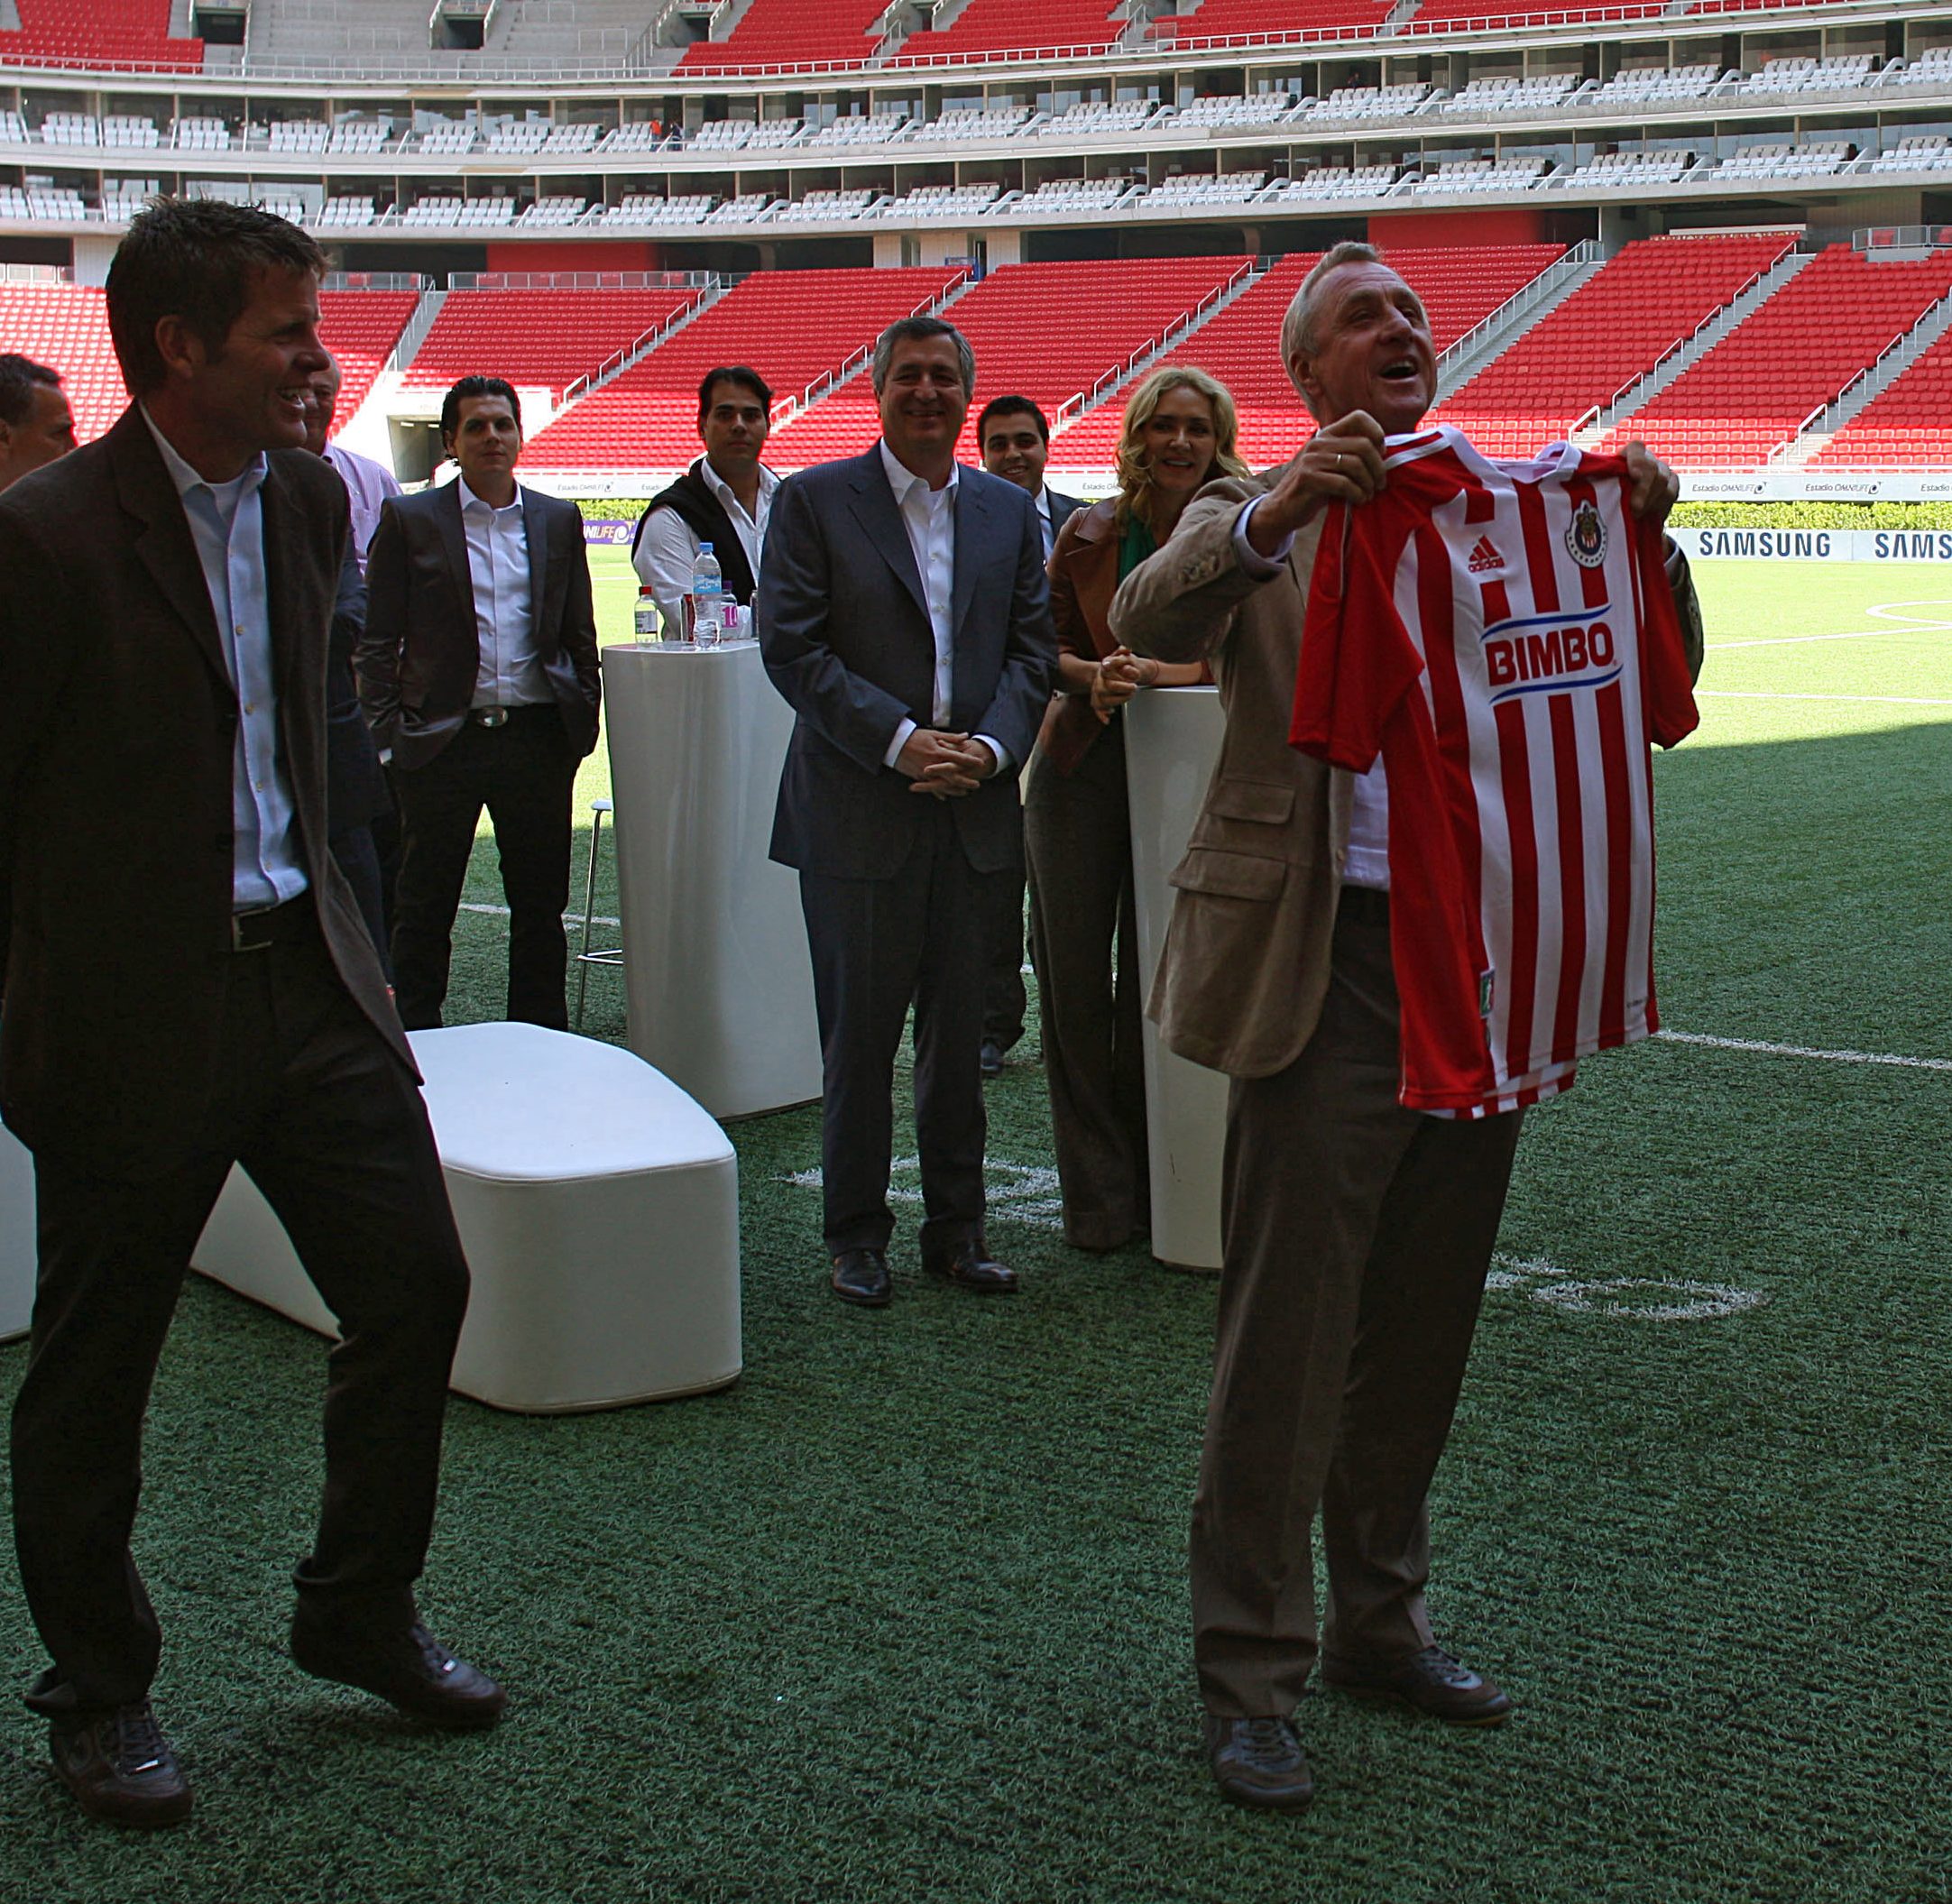 Mexican club Chivas played on a plastic pitch until Johan Cruyff came on board as an adviser and told them to ditch it for grass